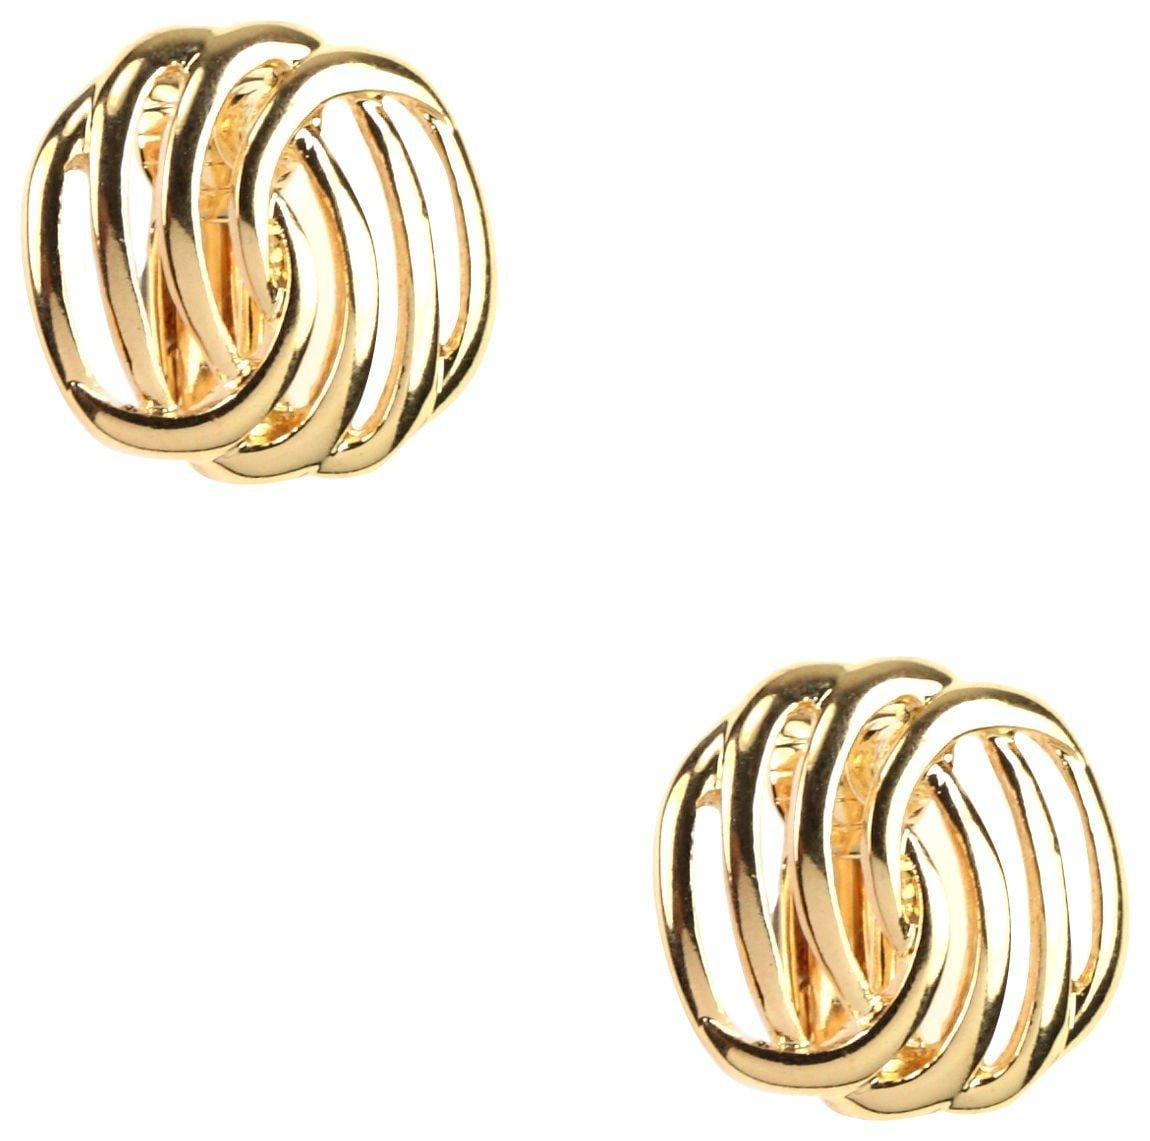 Details about   NAPIER clip on earrings 